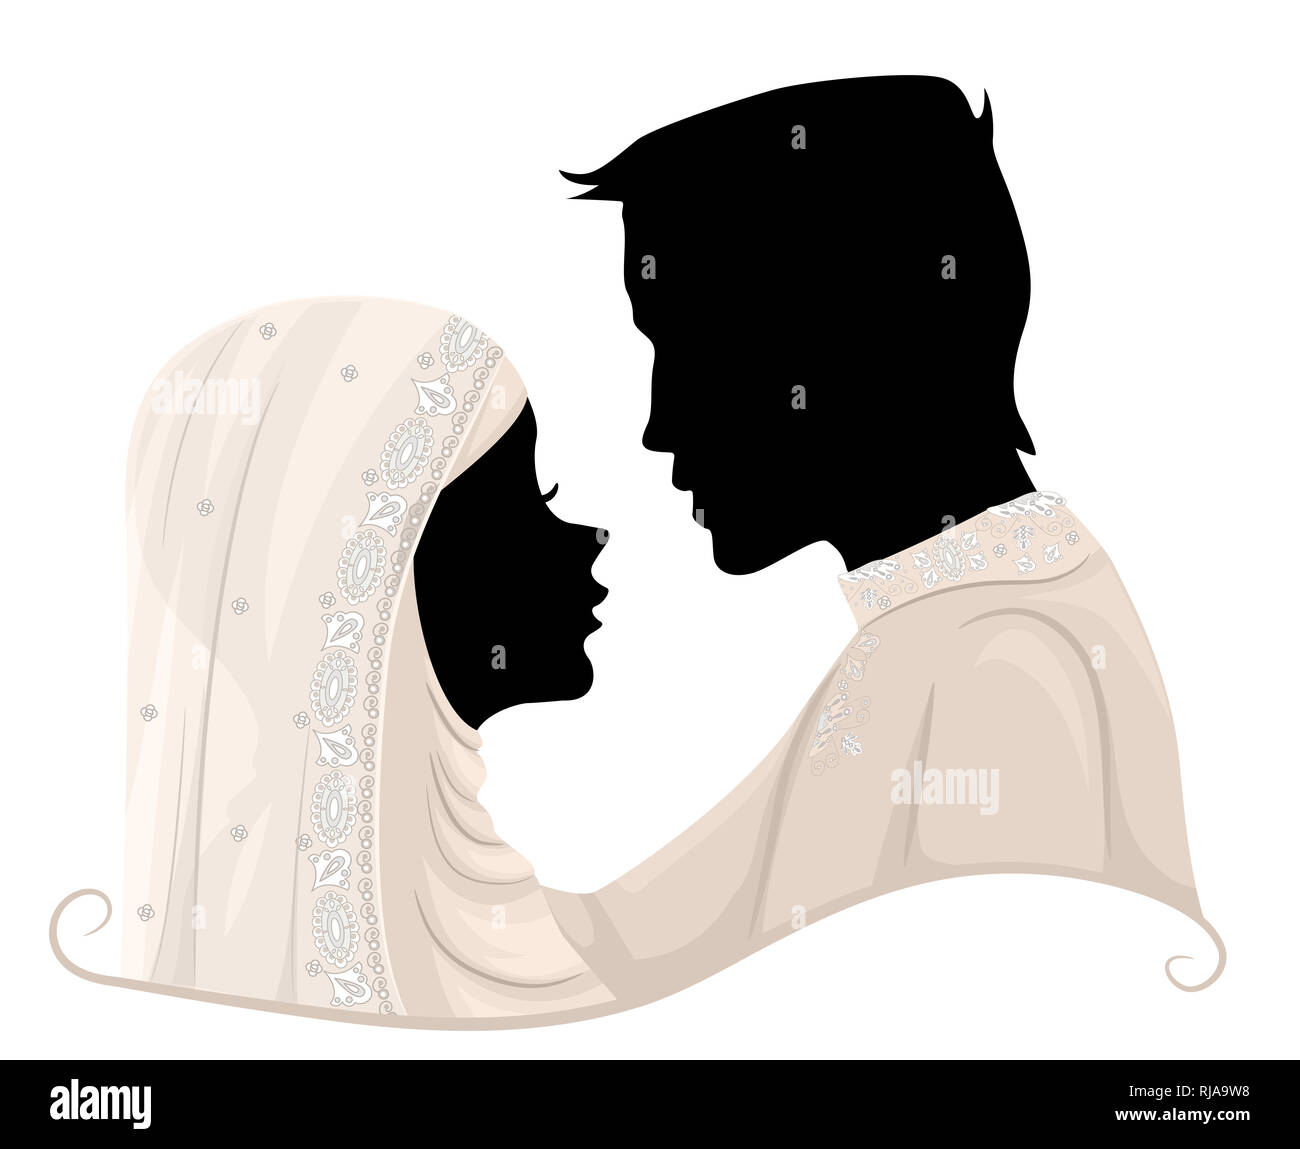 Illustration of a Muslim Bride and Groom Silhouette Looking at Each Other During their Wedding Stock Photo